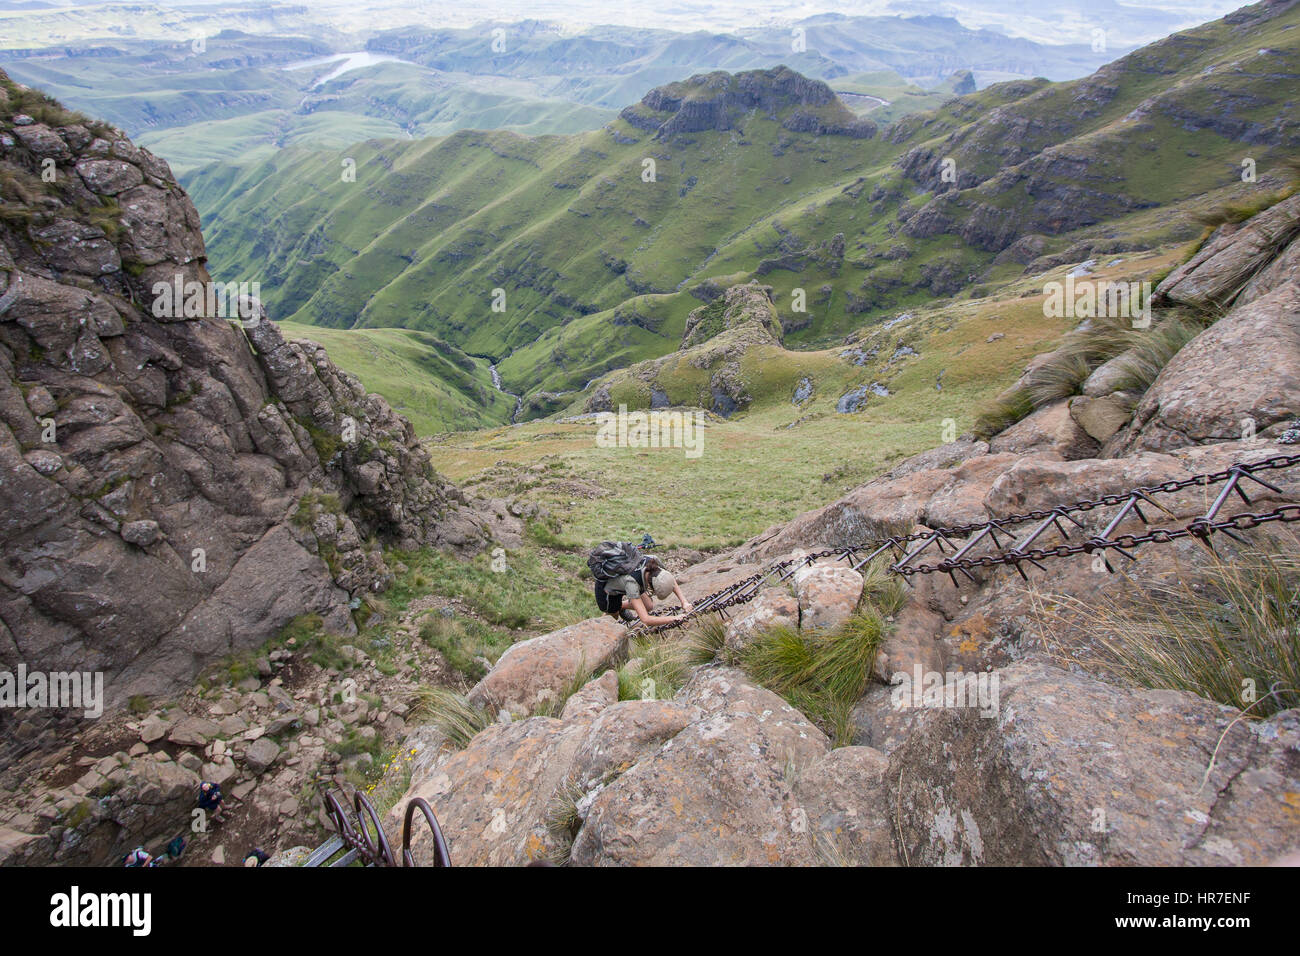 A hiker navigates steep chain ladders to get up a cliff in Royal Natal National Park, South Africa on the Amphitheater Hike. Stock Photo